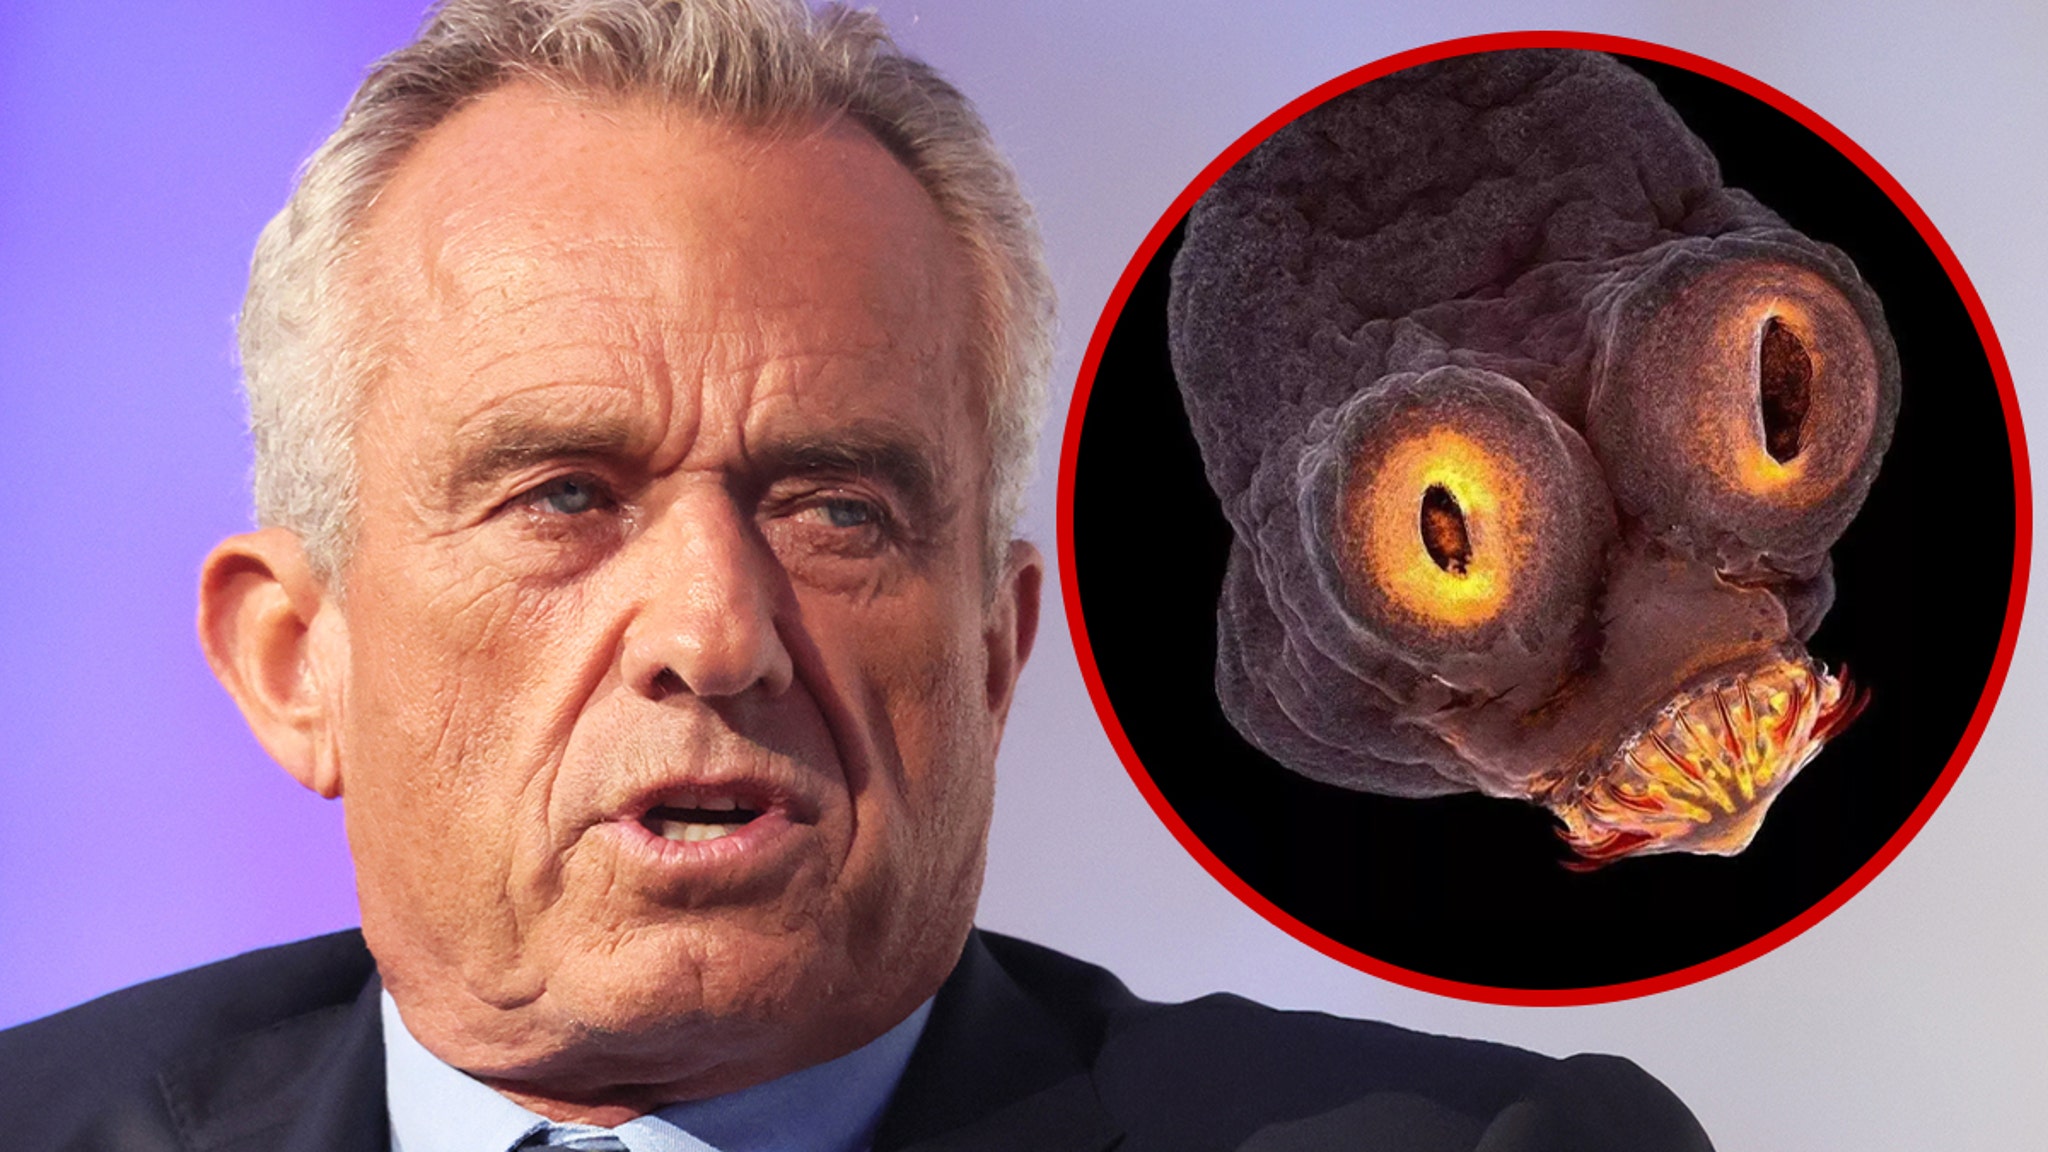 Robert F. Kennedy Jr. Says a Worm Ate Part of His Brain Years Ago